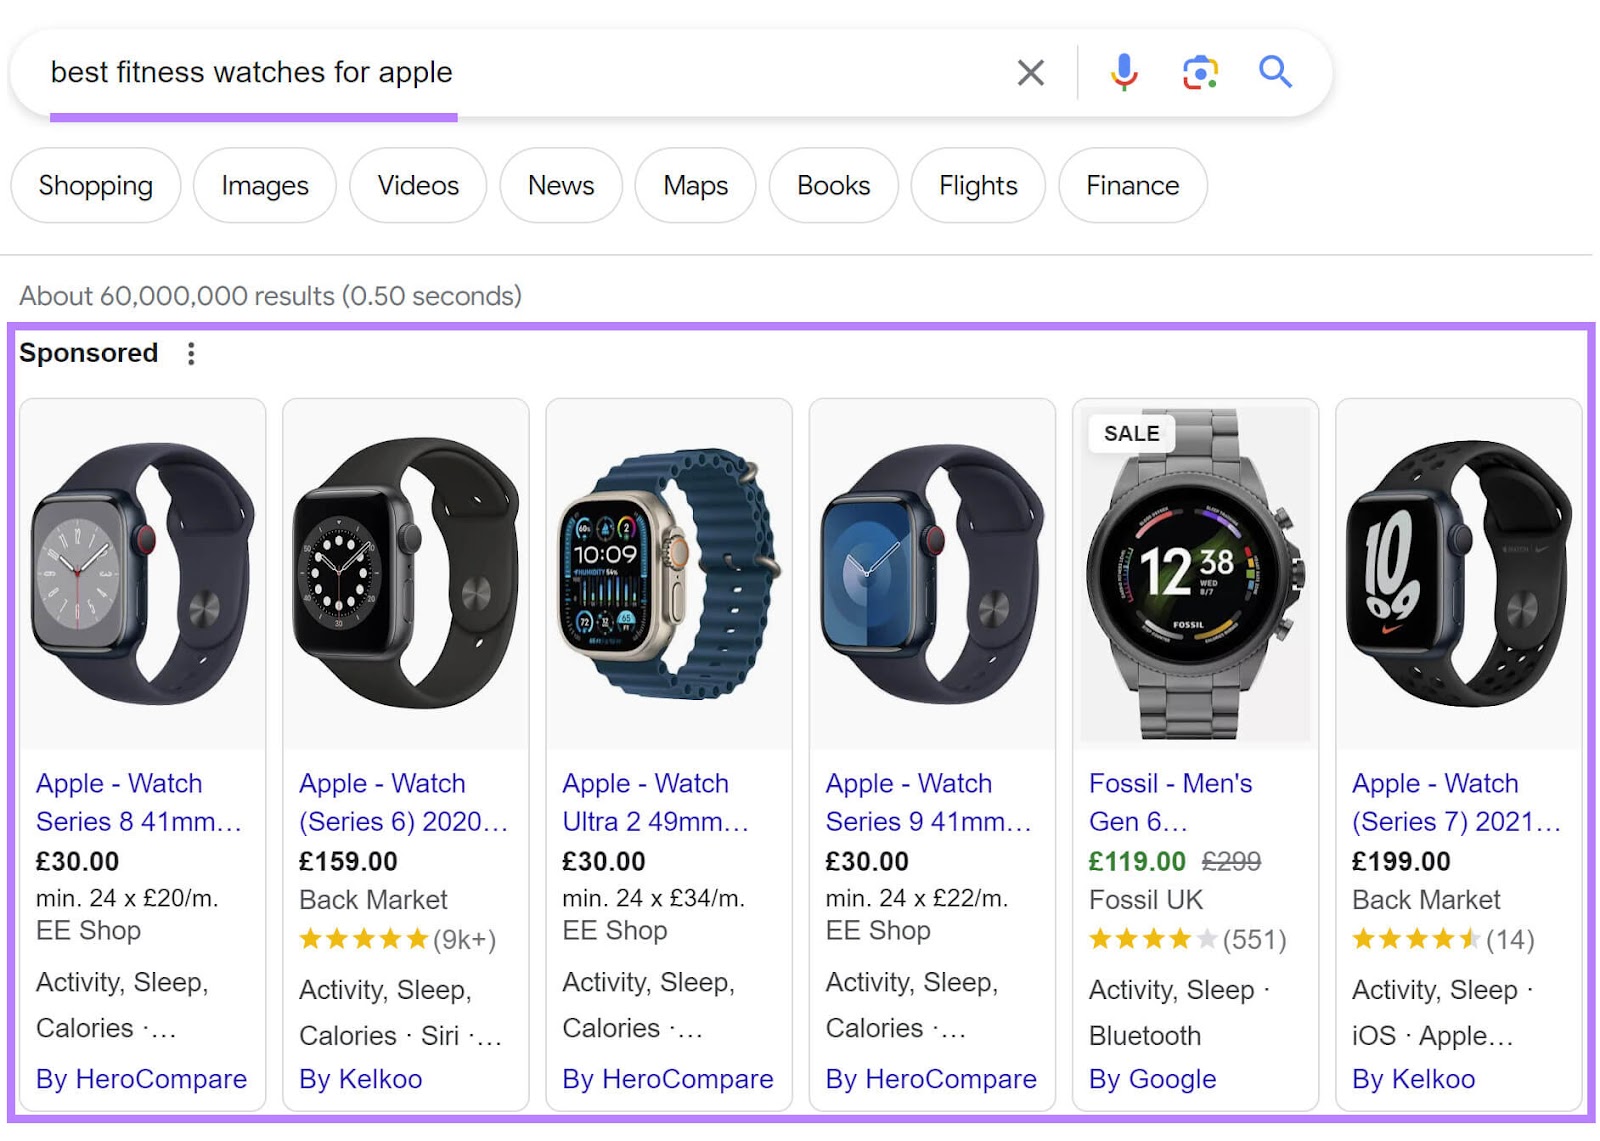 Google ads shown for “best fitness watches for Apple" query